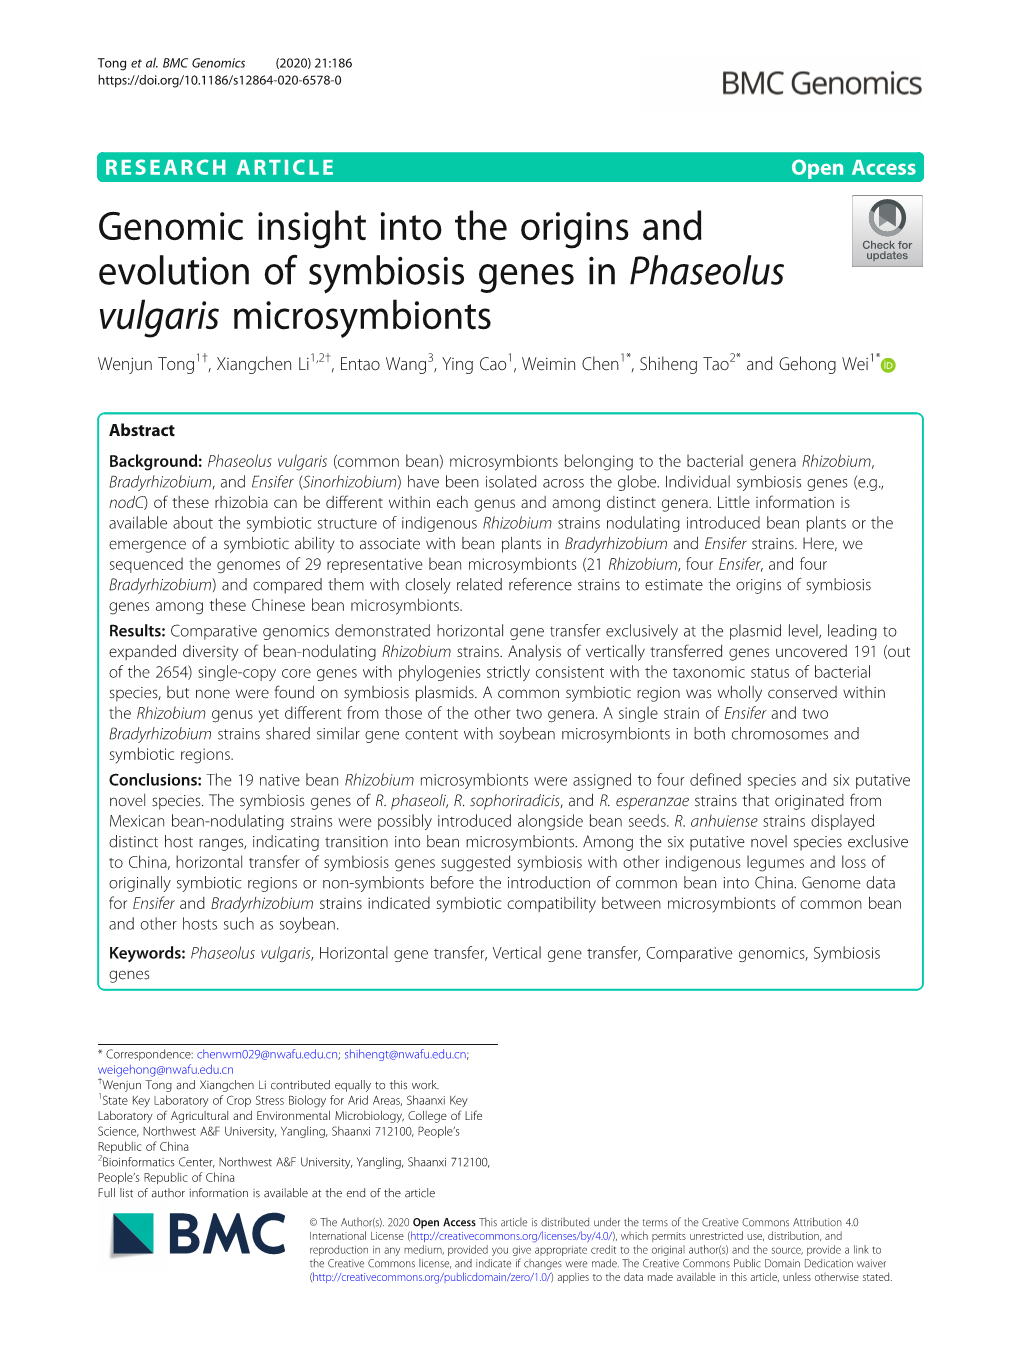 Genomic Insight Into the Origins and Evolution of Symbiosis Genes In